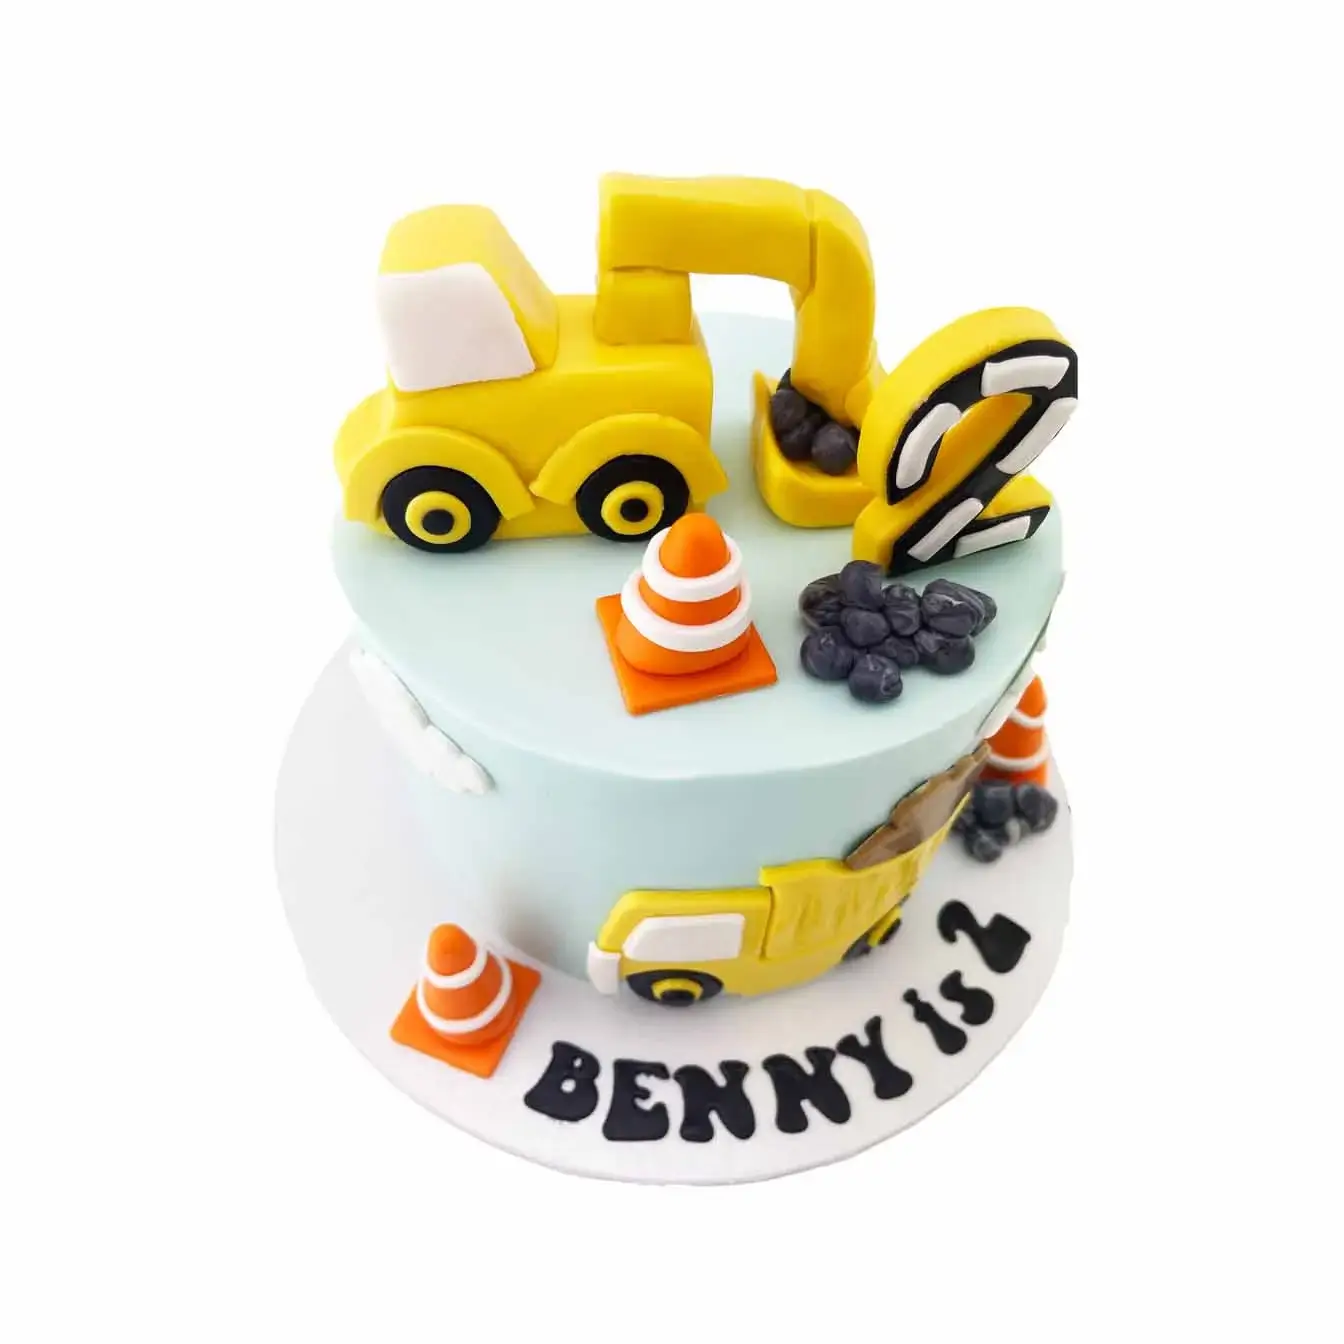 Make your little builder's day with our Kids Construction Cake! Featuring a model digger, cutout trucks, rubble, and traffic cones, this visually impressive cake is the perfect centerpiece for any construction-themed party